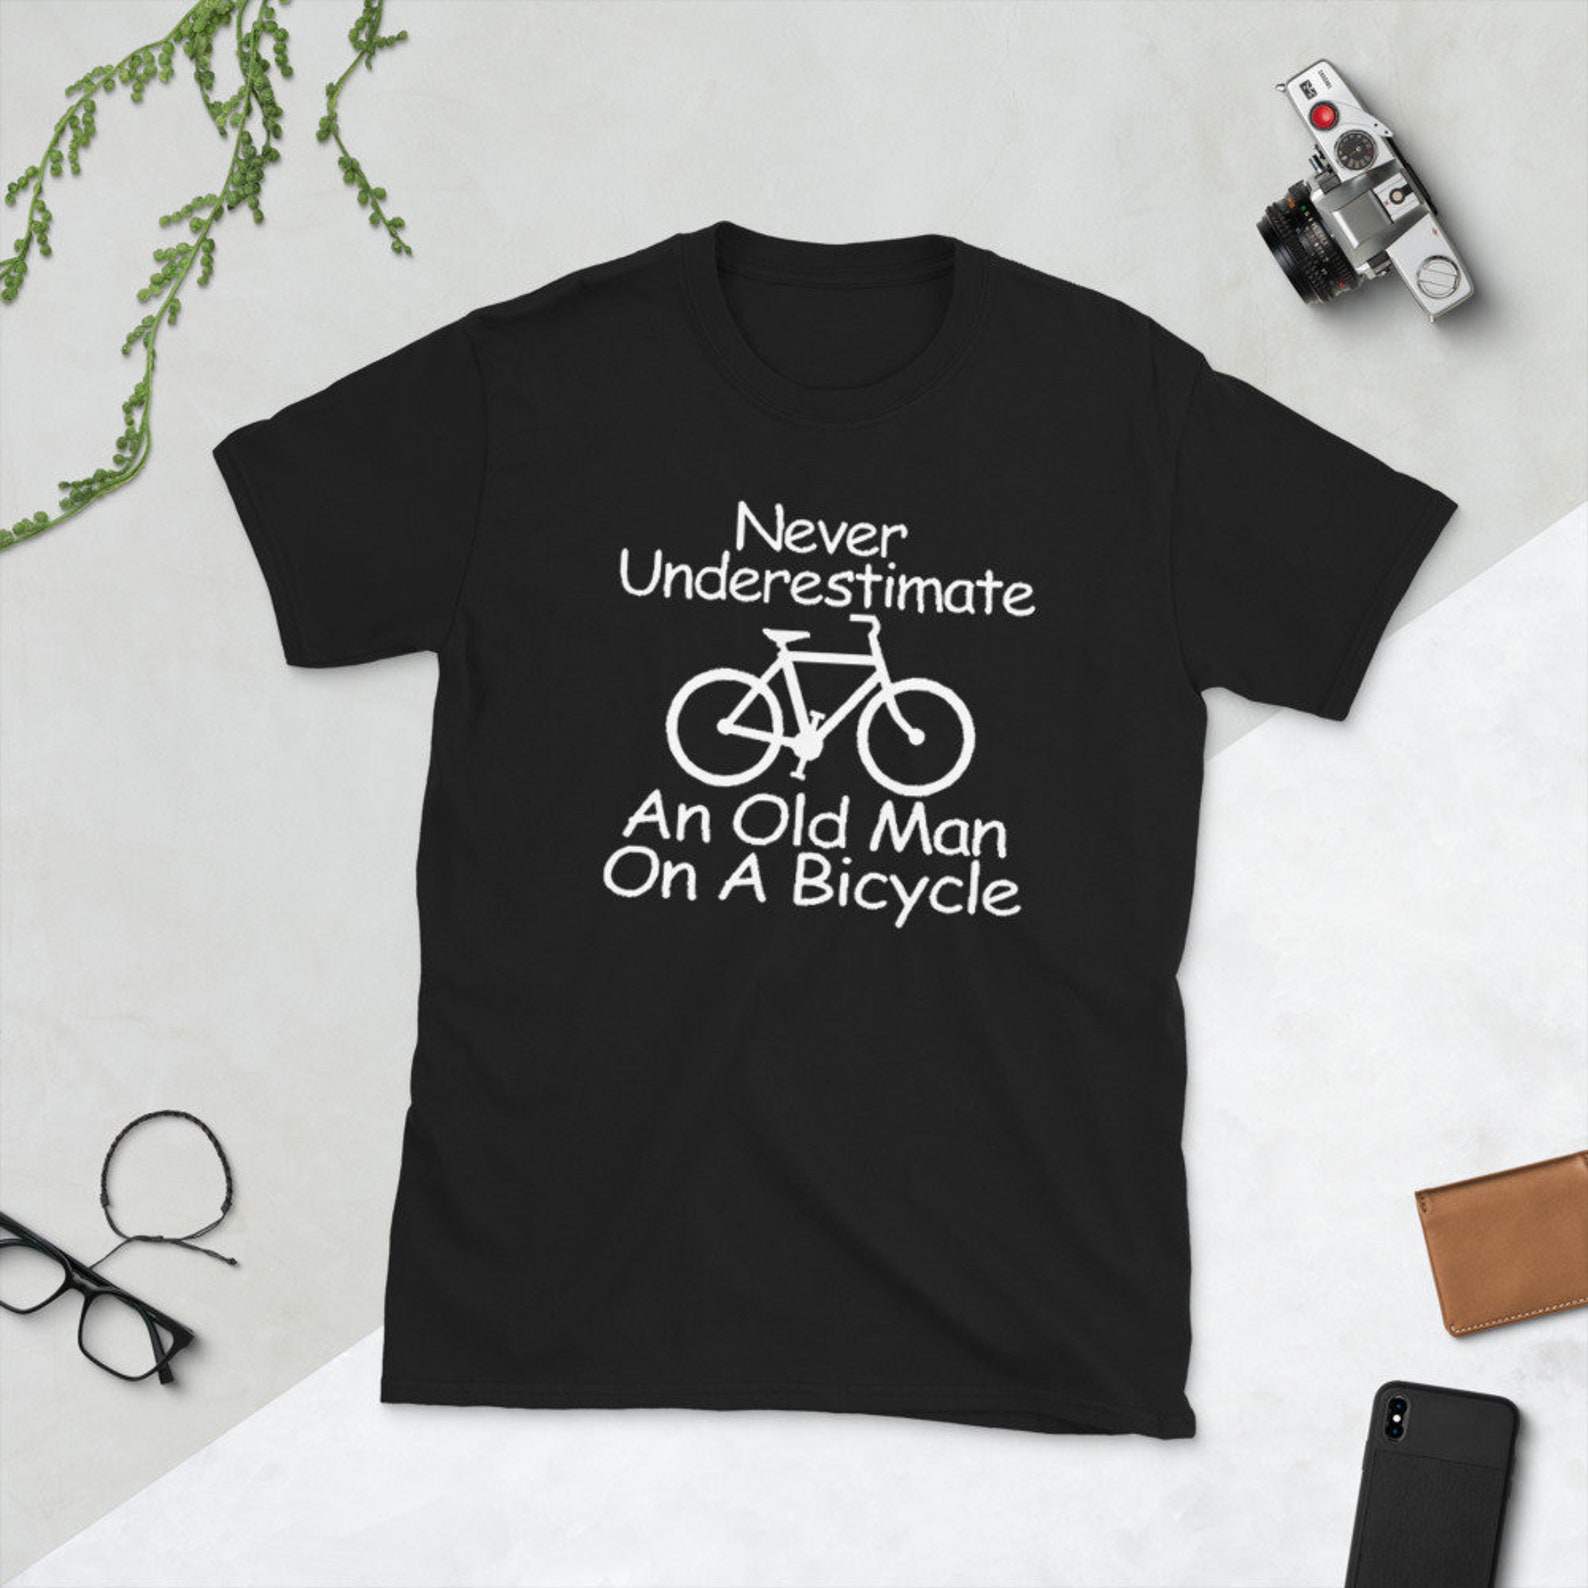 Never Underestimate An Old Guy On A Bicycle Funny Cycling | Etsy